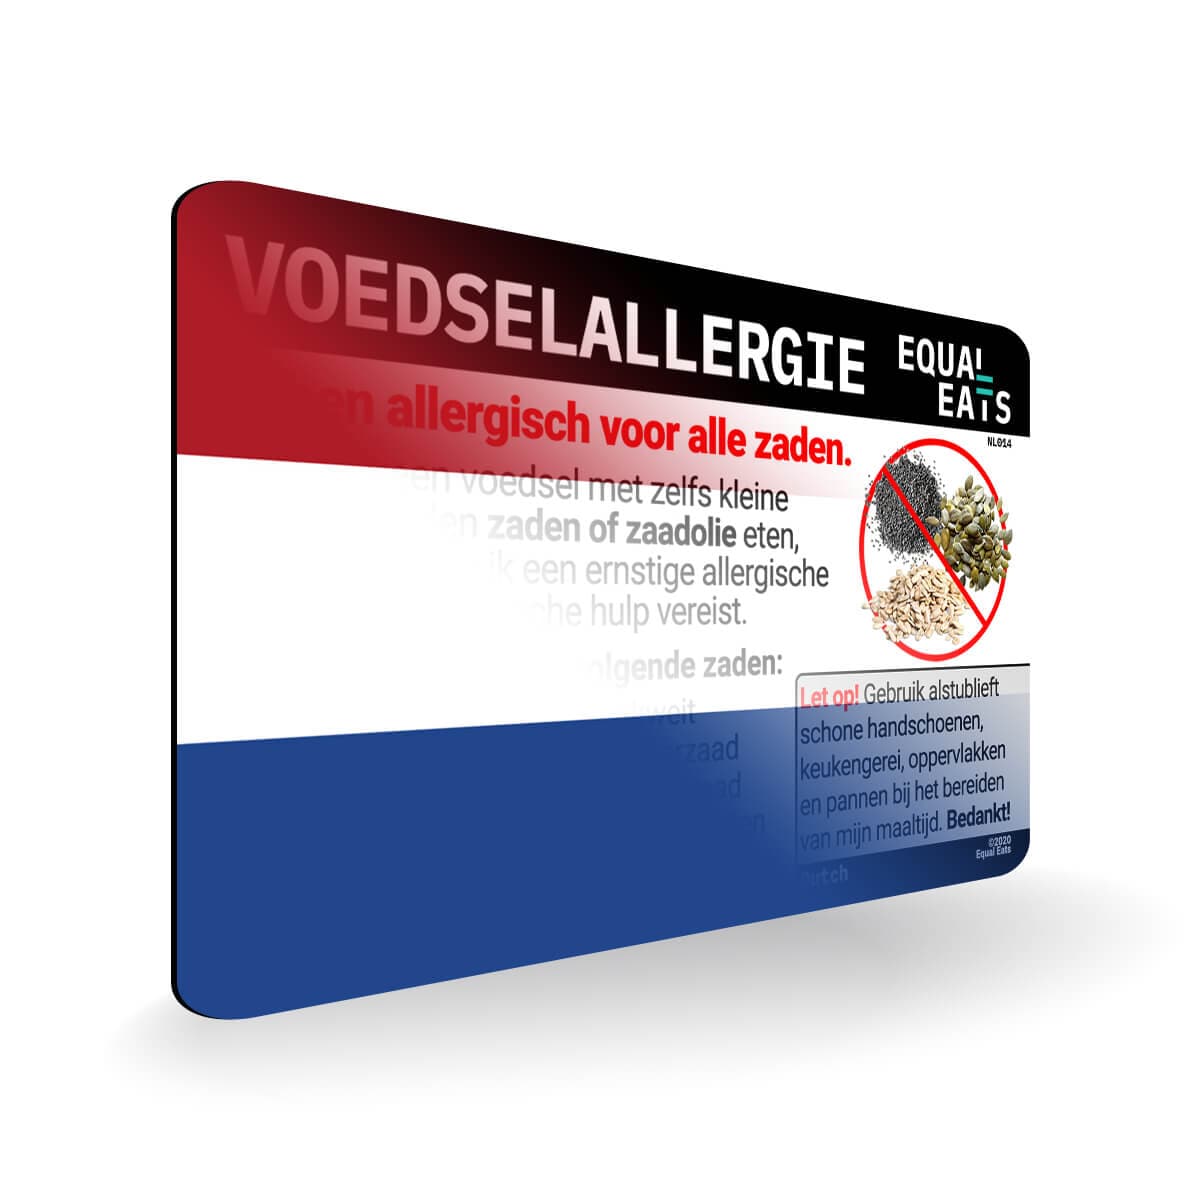 Seed Allergy in Dutch. Seed Allergy Card for Netherlands